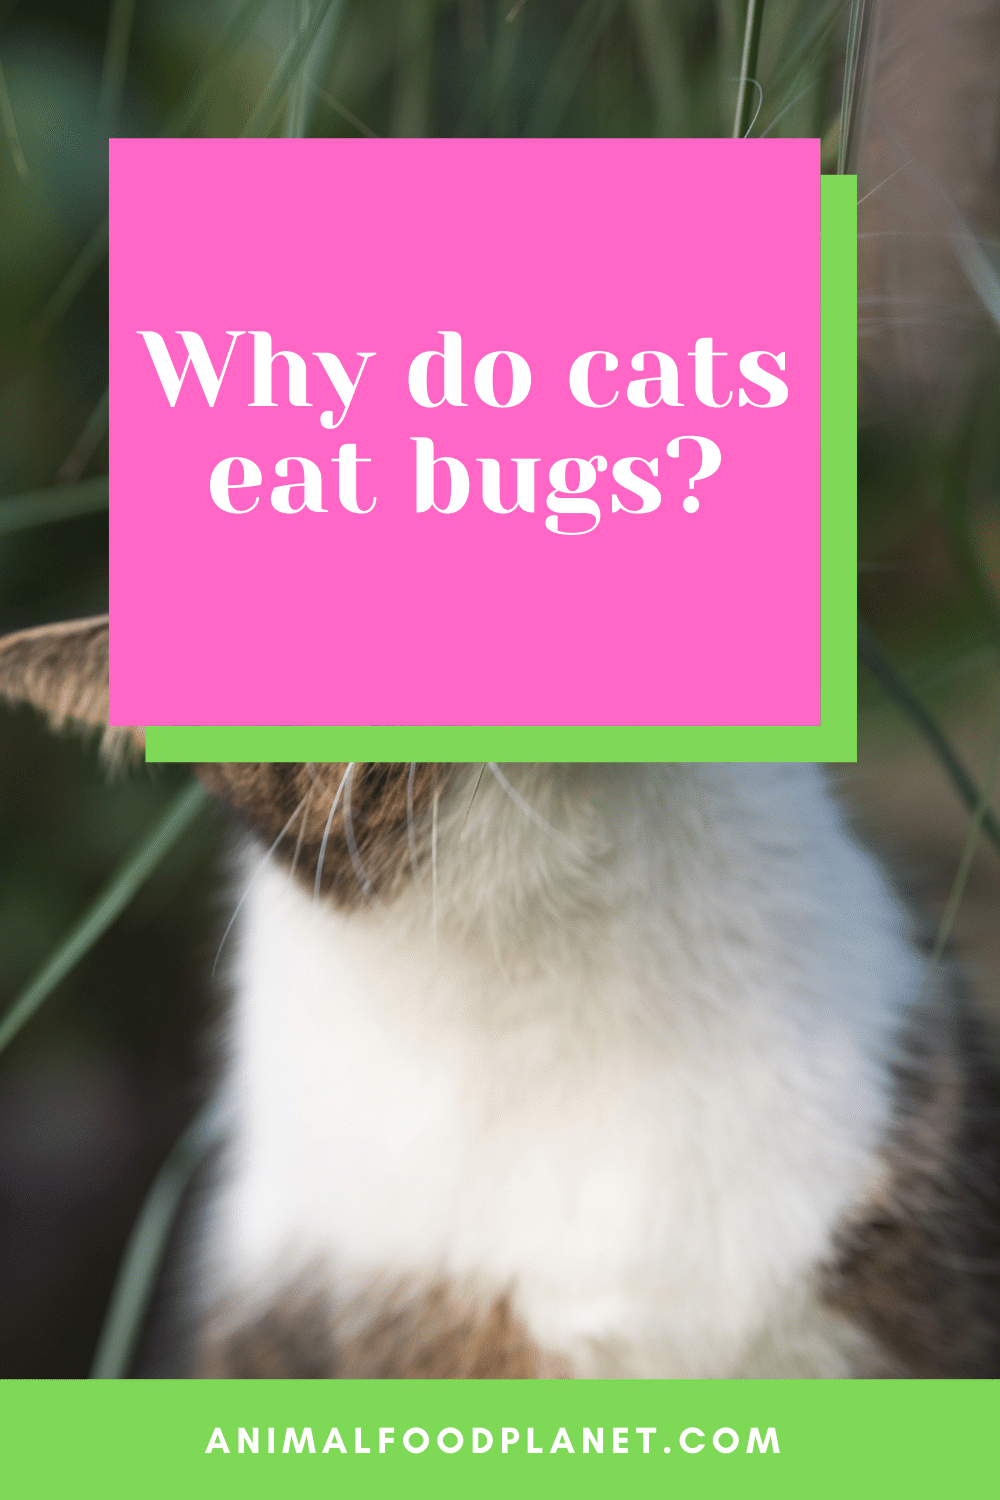 Why do cats eat bugs?